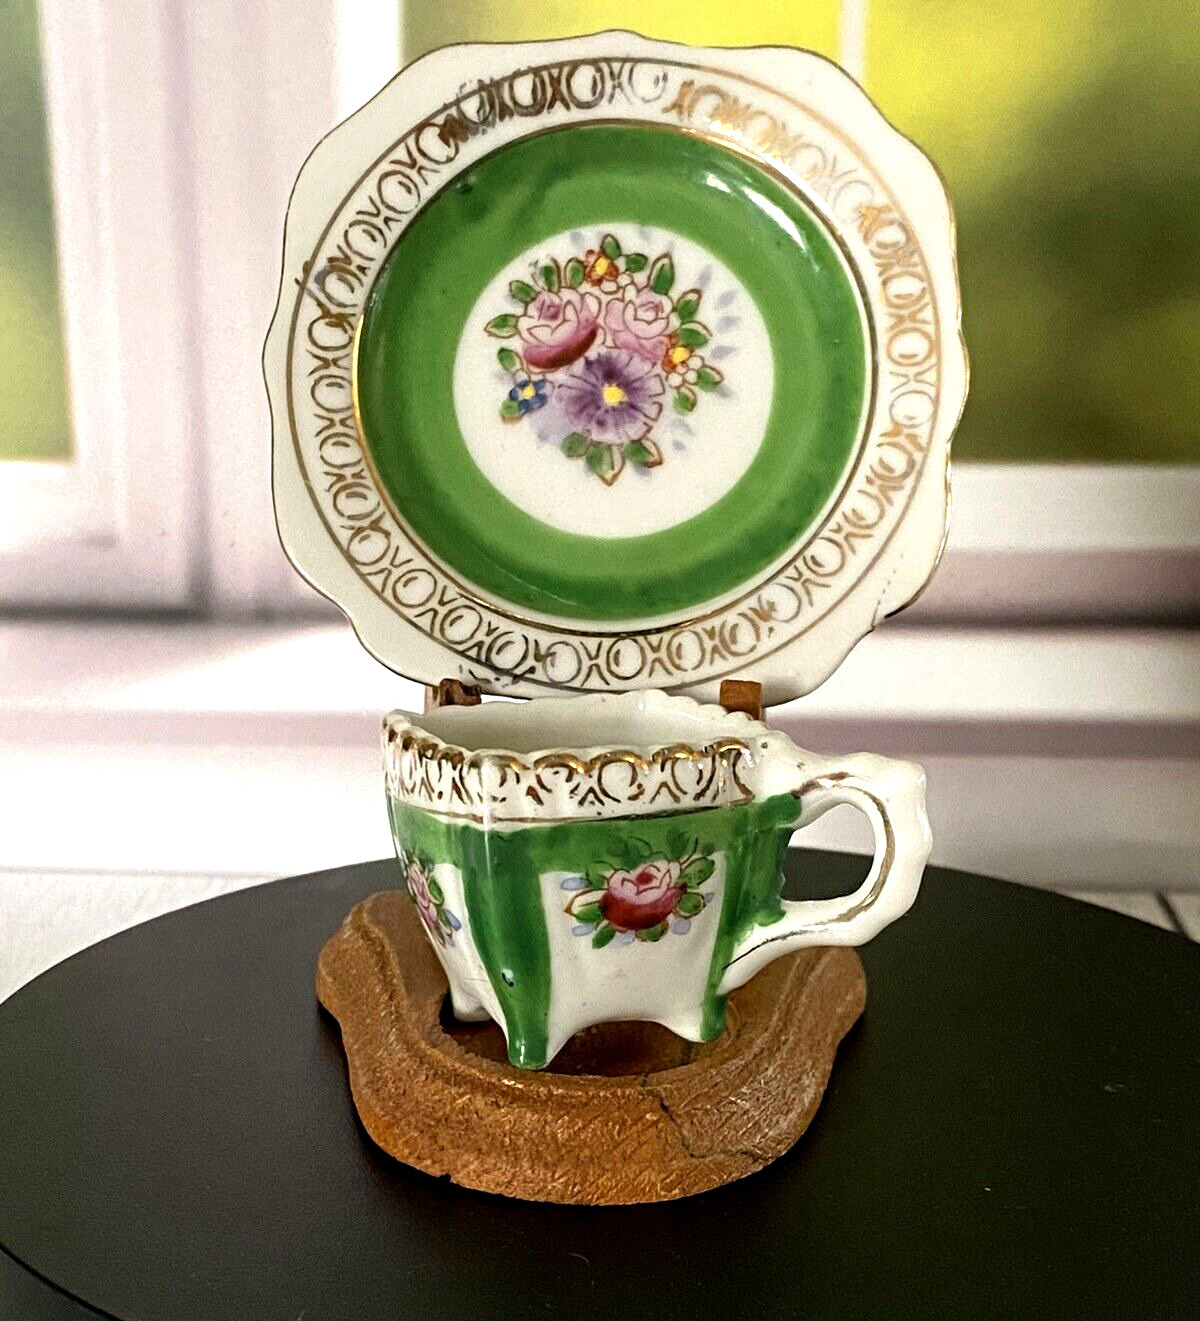 Vintage Minature Square Tea Cup with Plate and Stand | Made in Japan